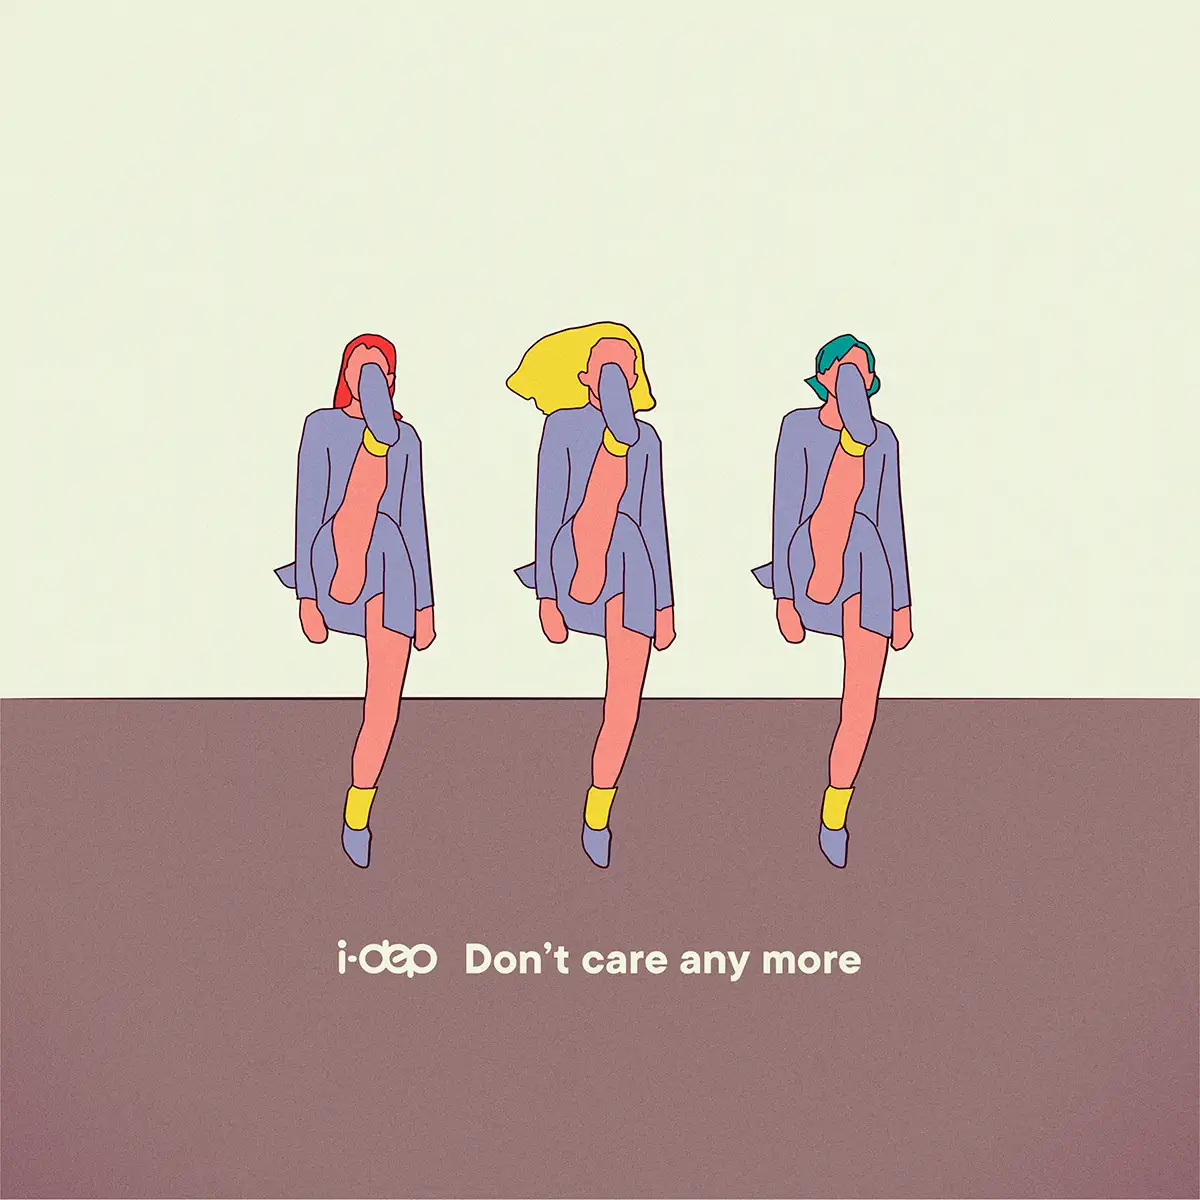 「Don’t care any more」i-dep アートワーク